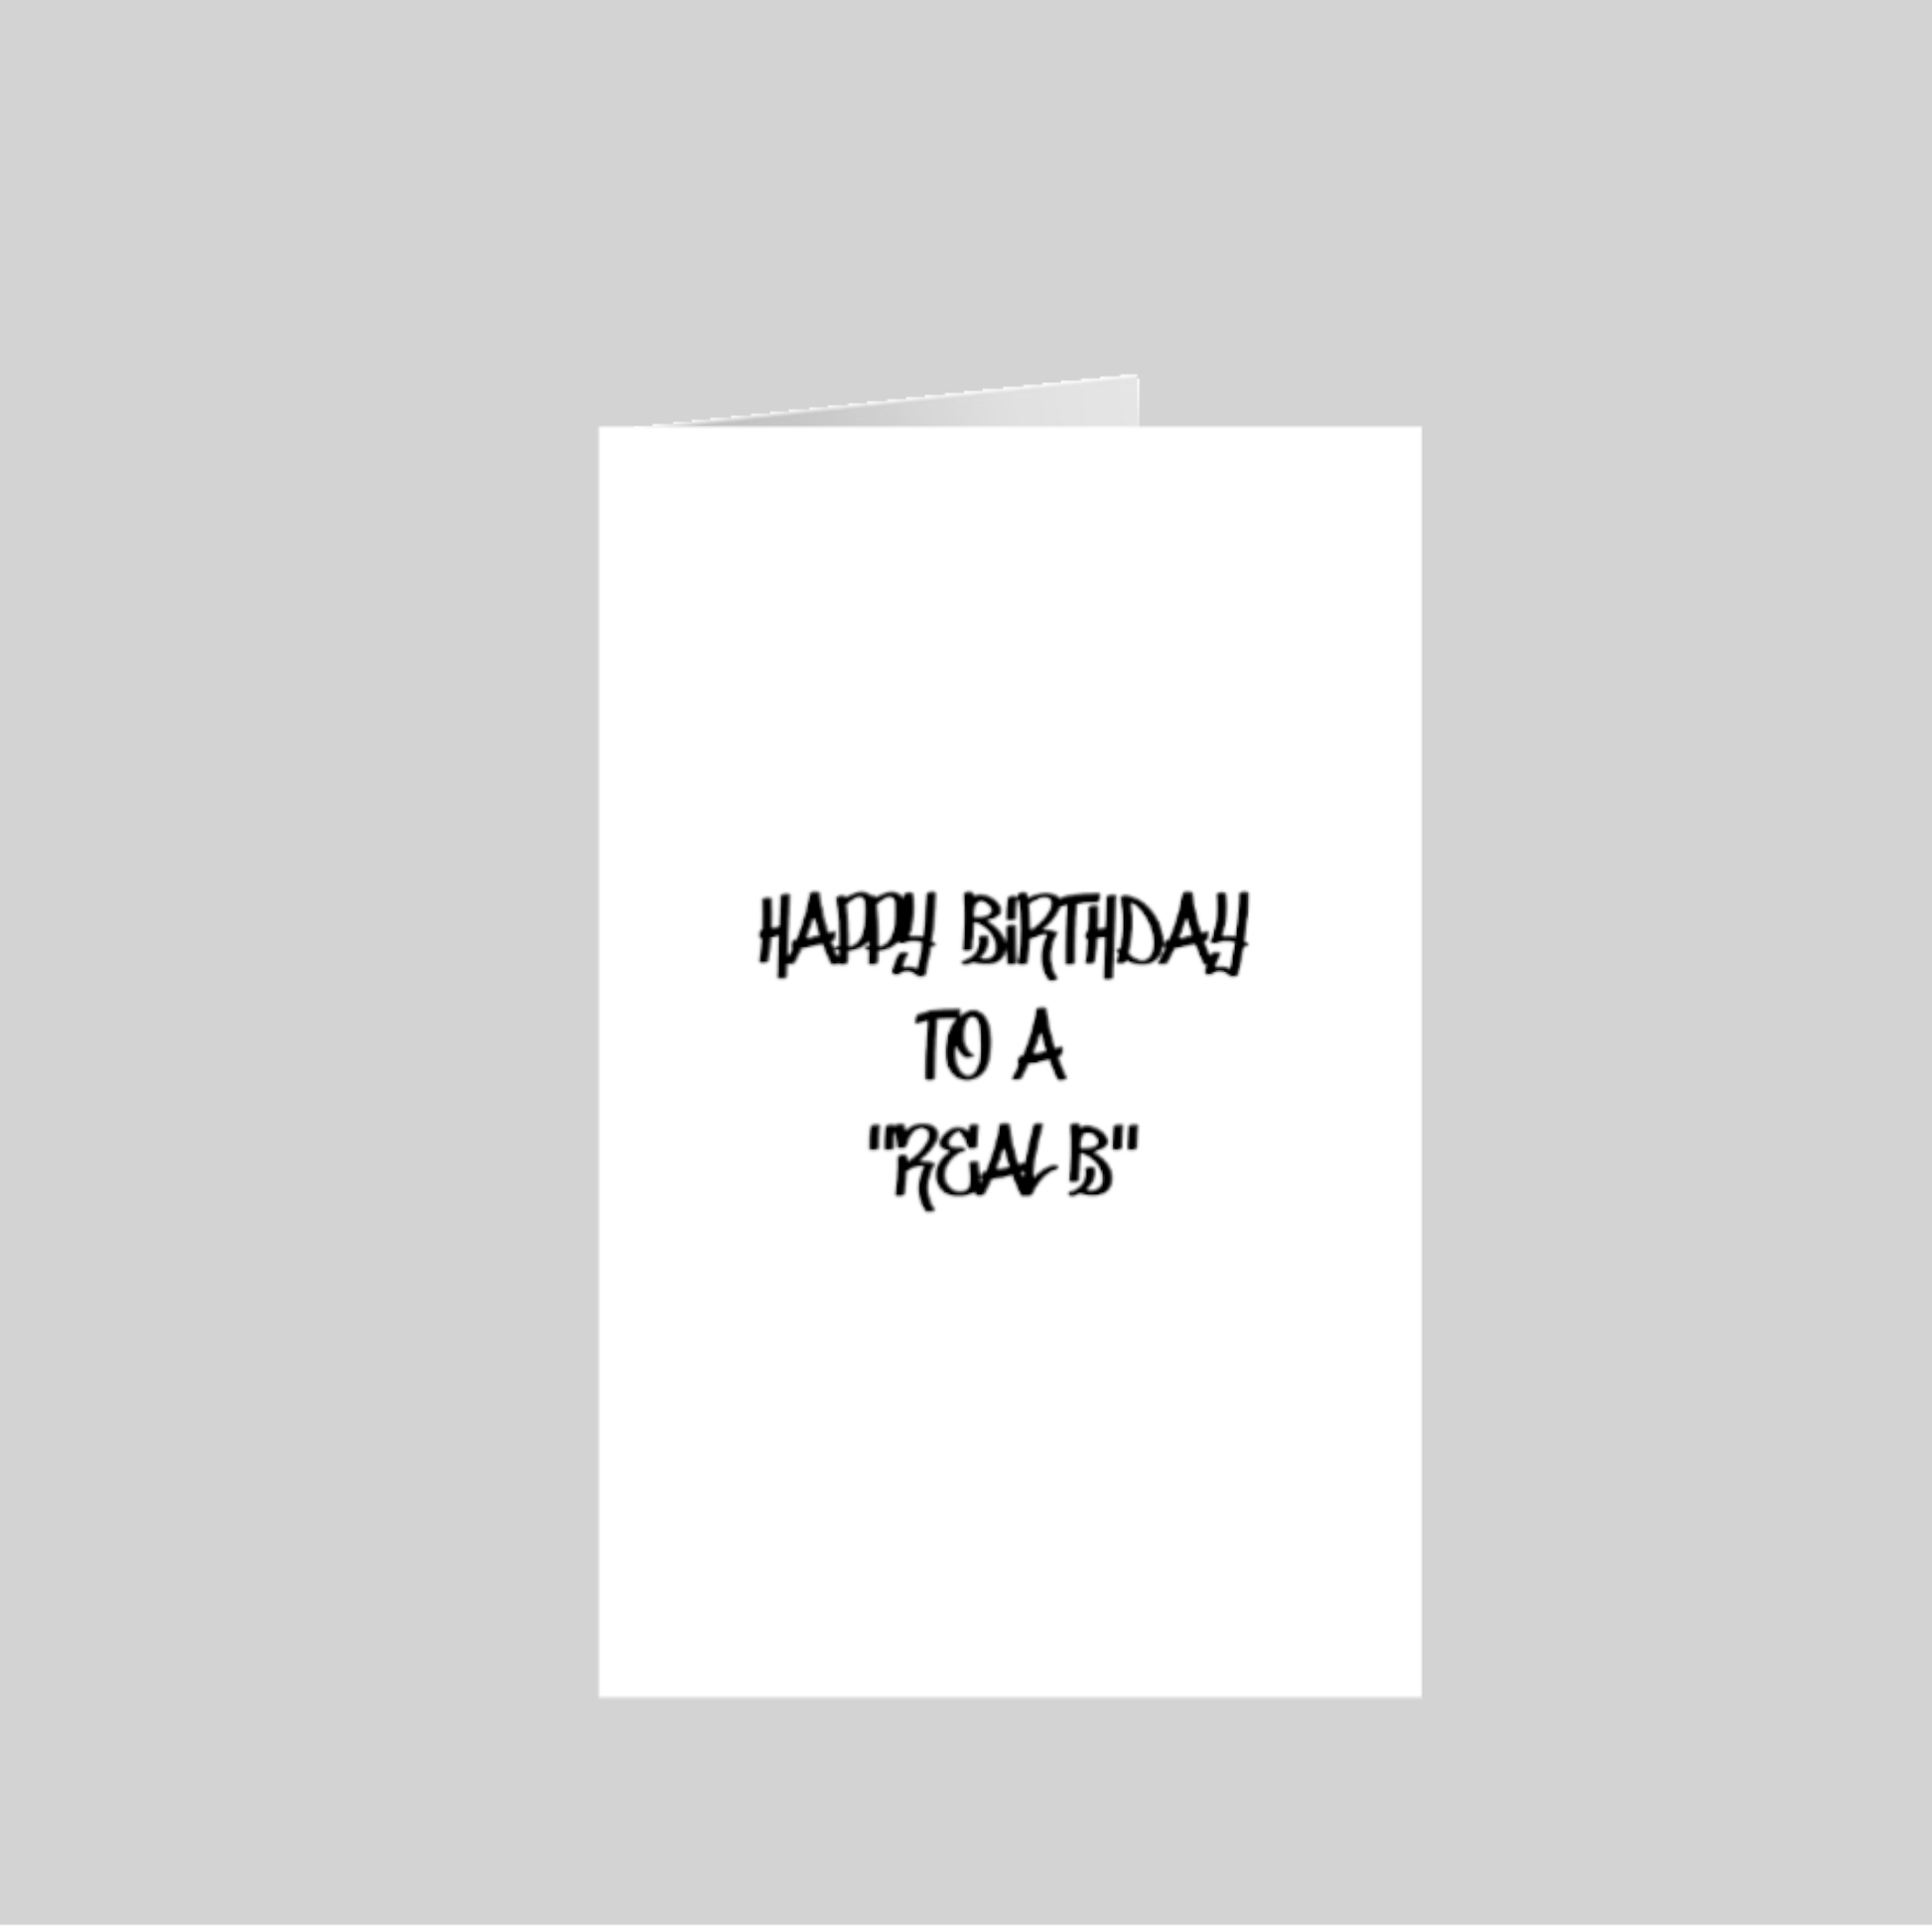 Happy Birthday to a 5.5x8.5 Greeting Card